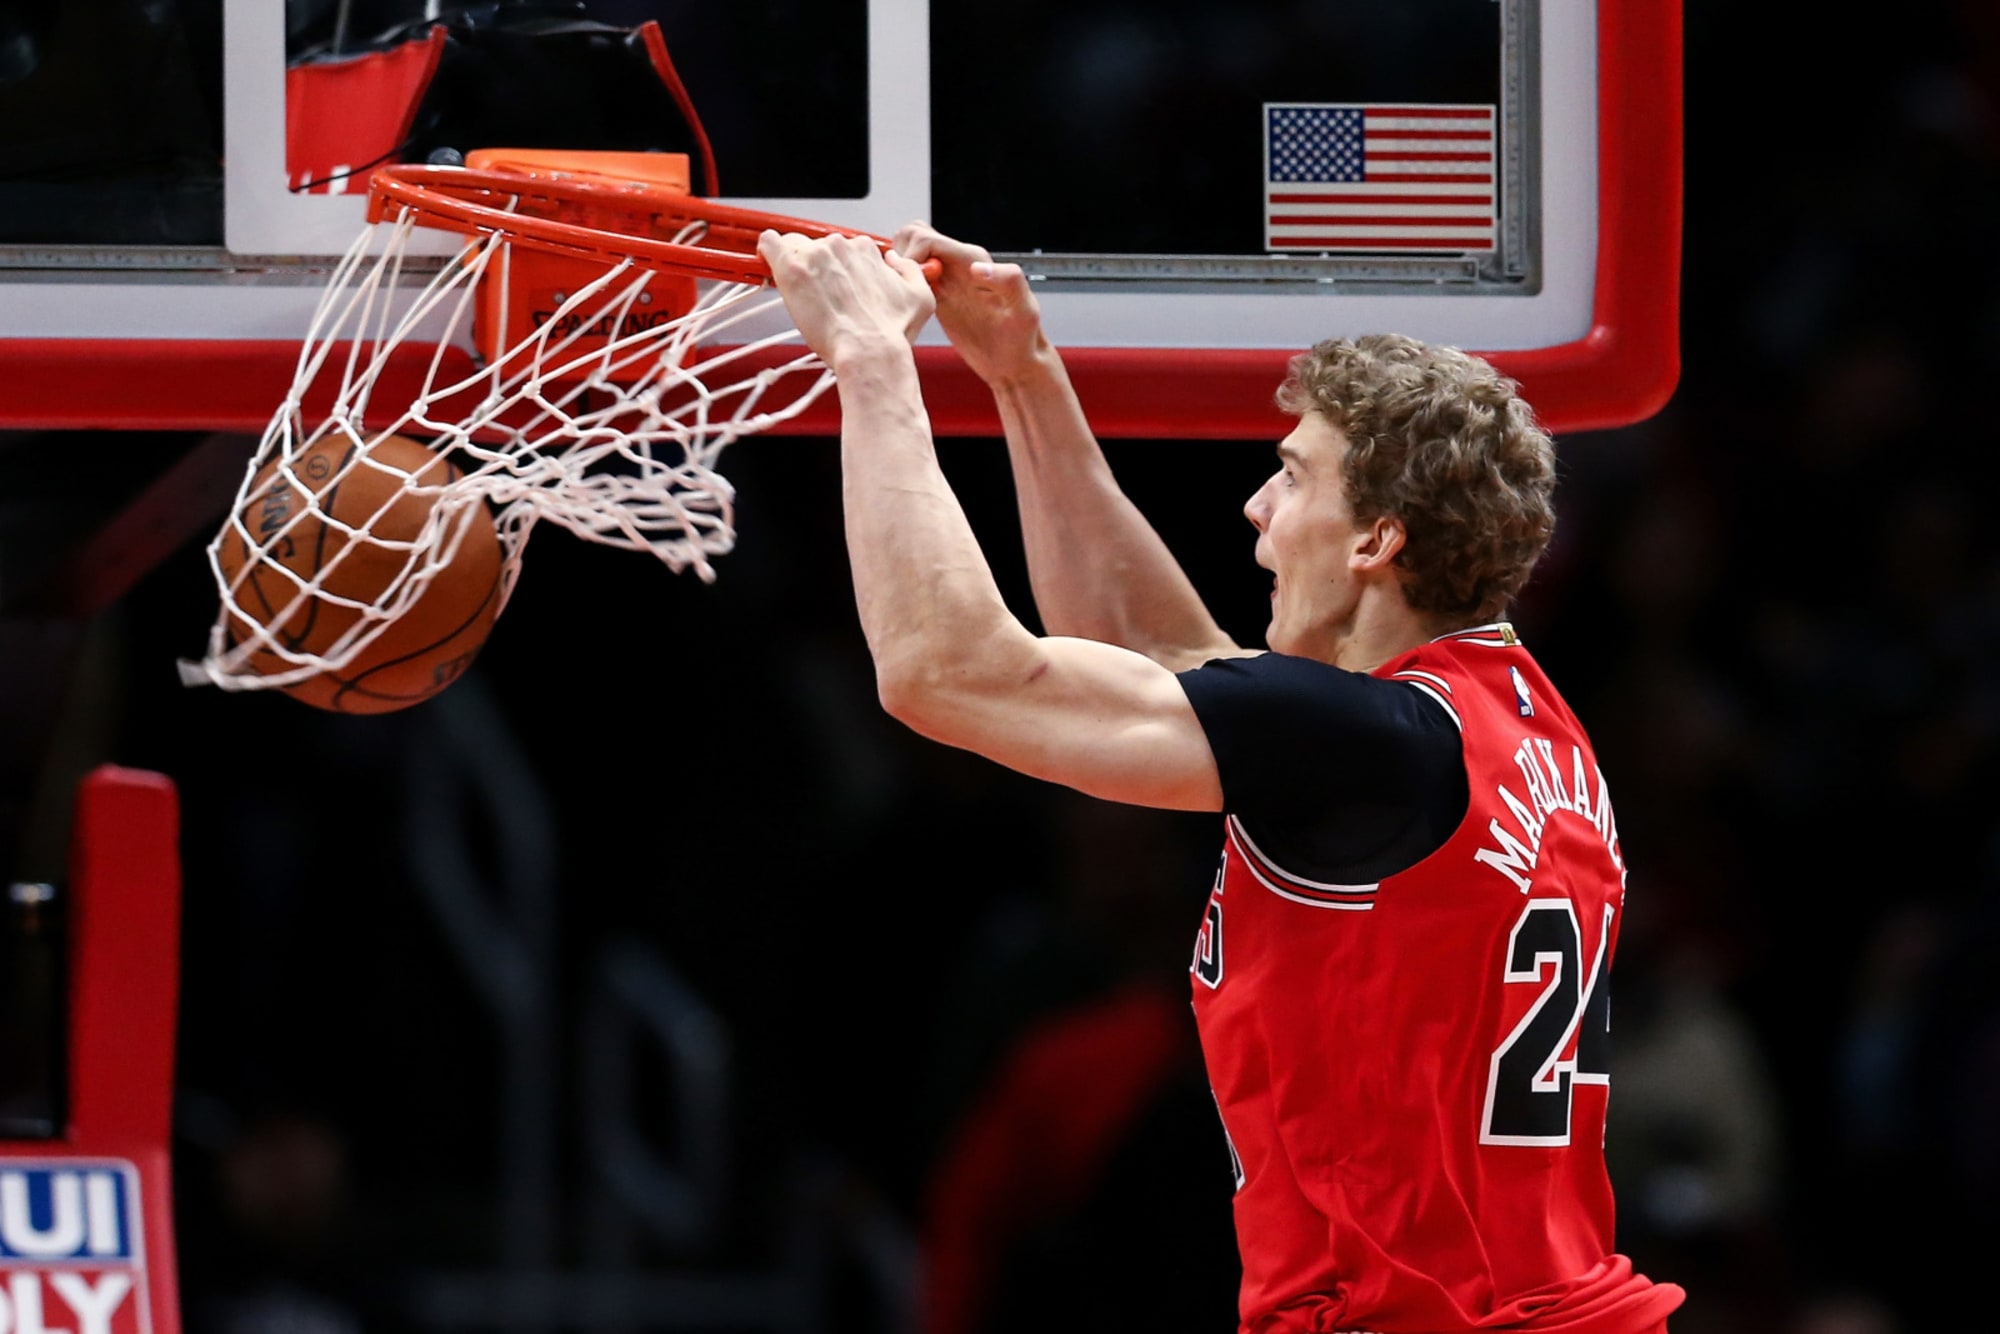 Bulls must decide whether to move on from forward Lauri Markkanen